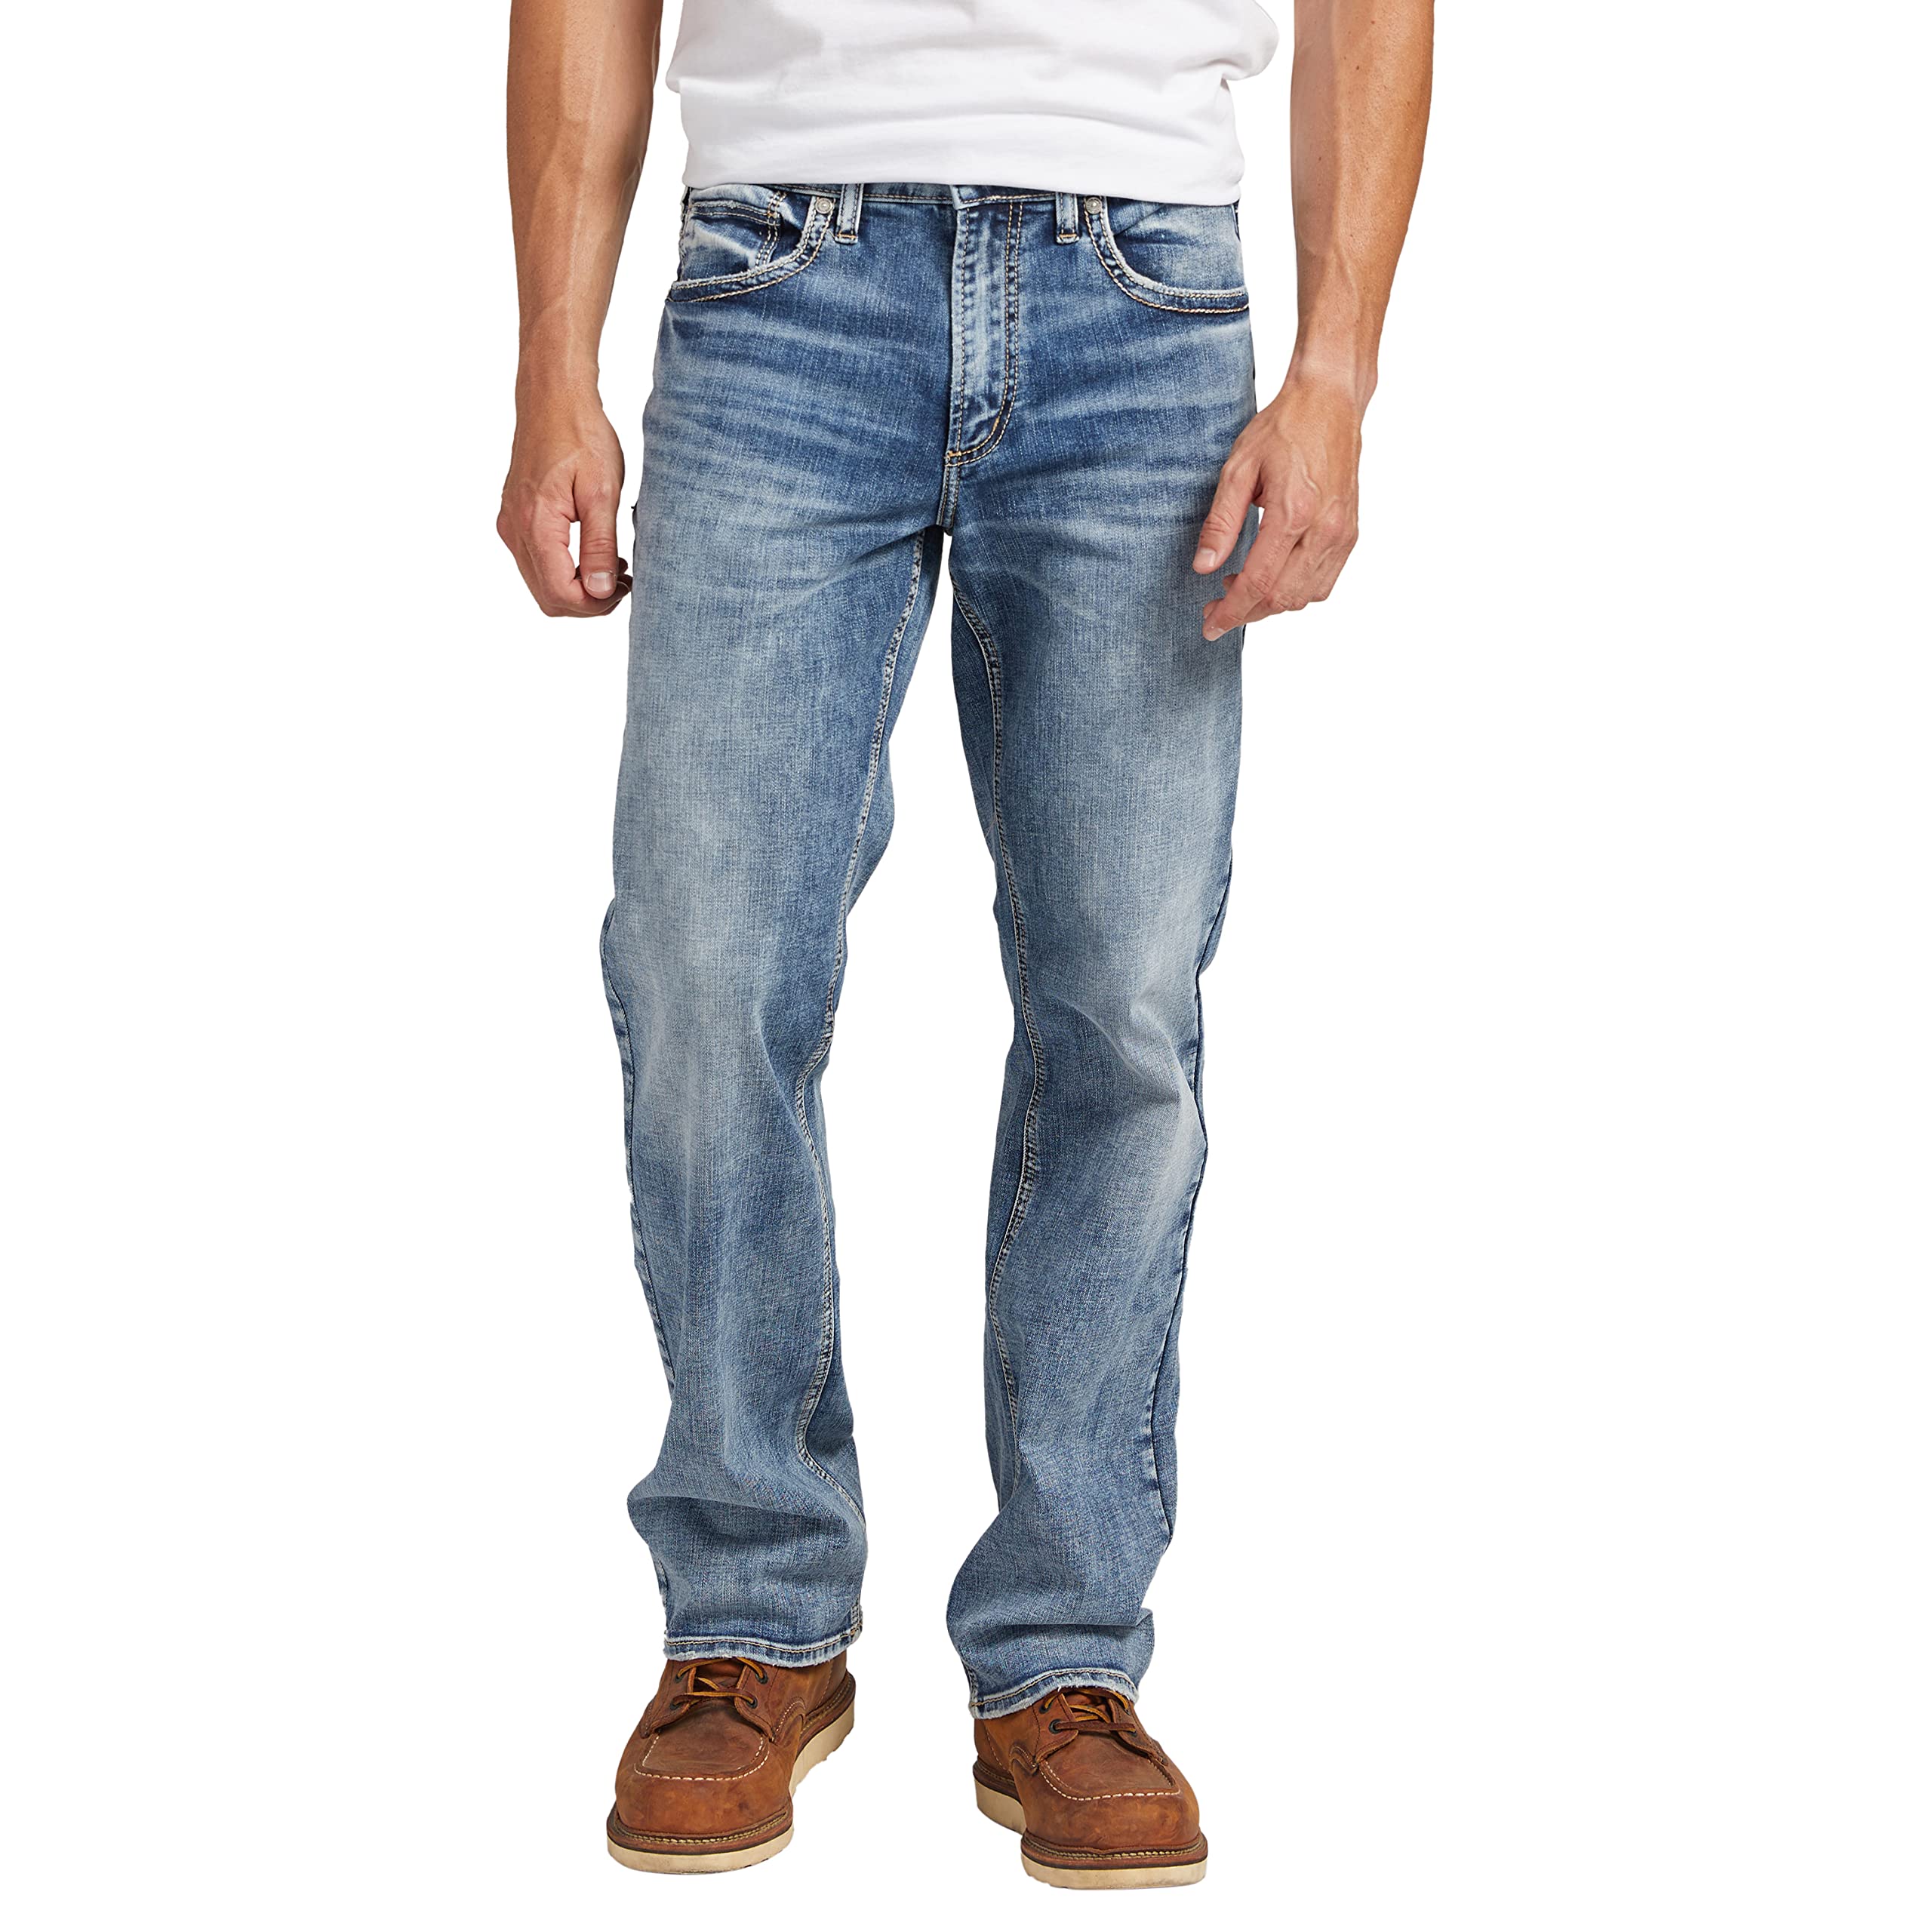 Silver Jeans co Mens Zac Relaxed Fit Straight Leg Jeans, Med wash SDK241, 34W x 34L